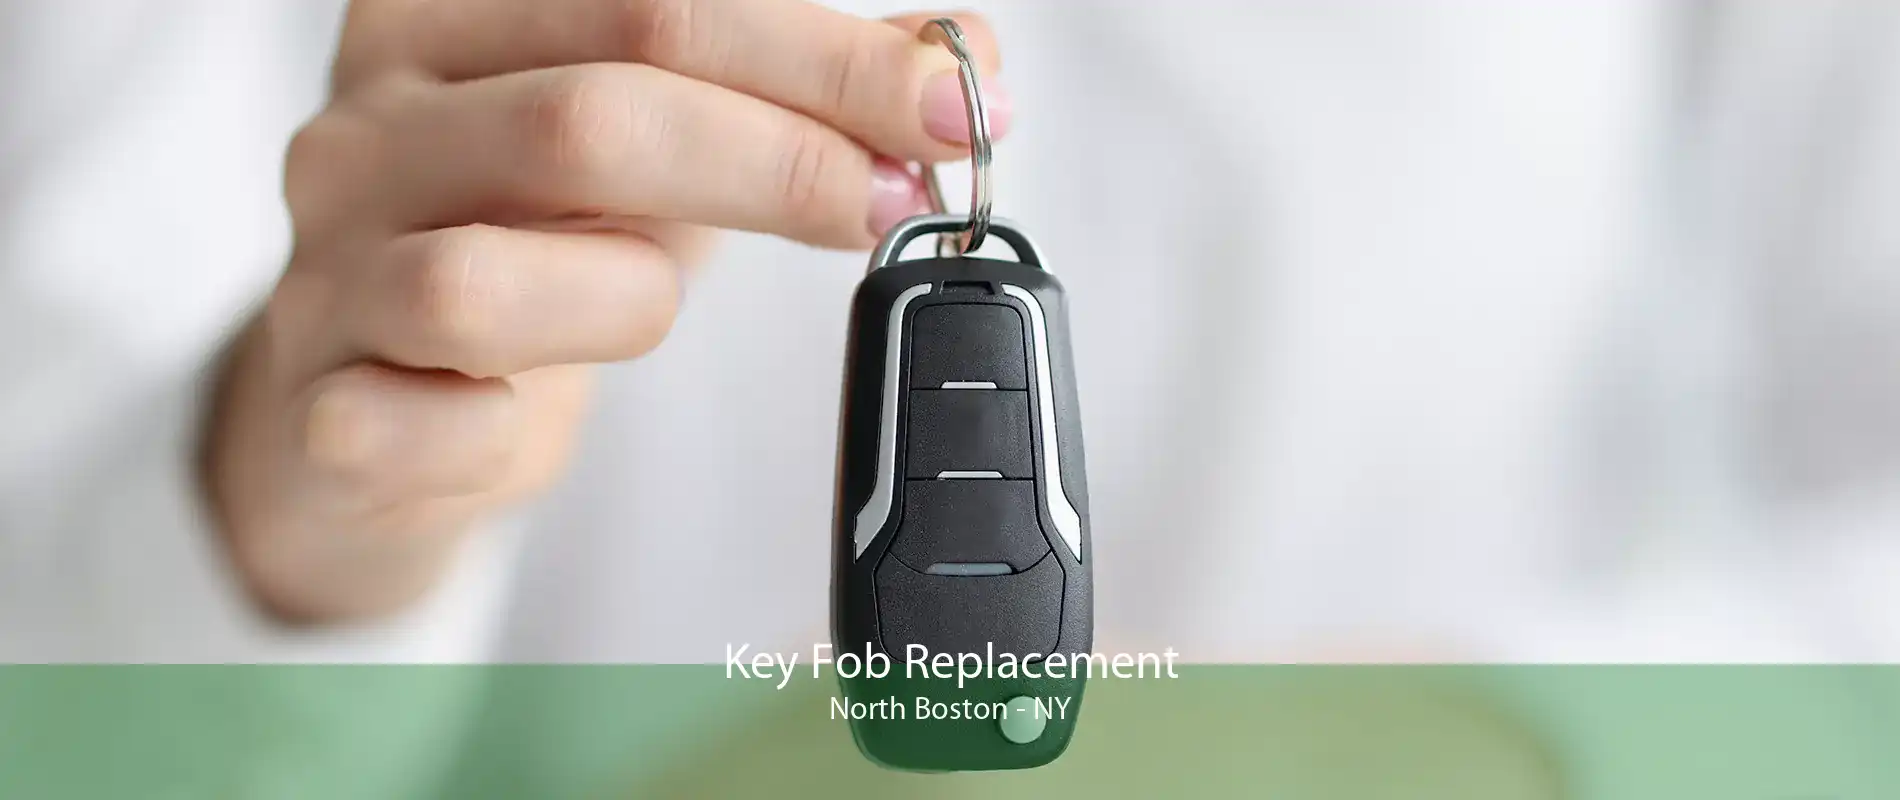 Key Fob Replacement North Boston - NY